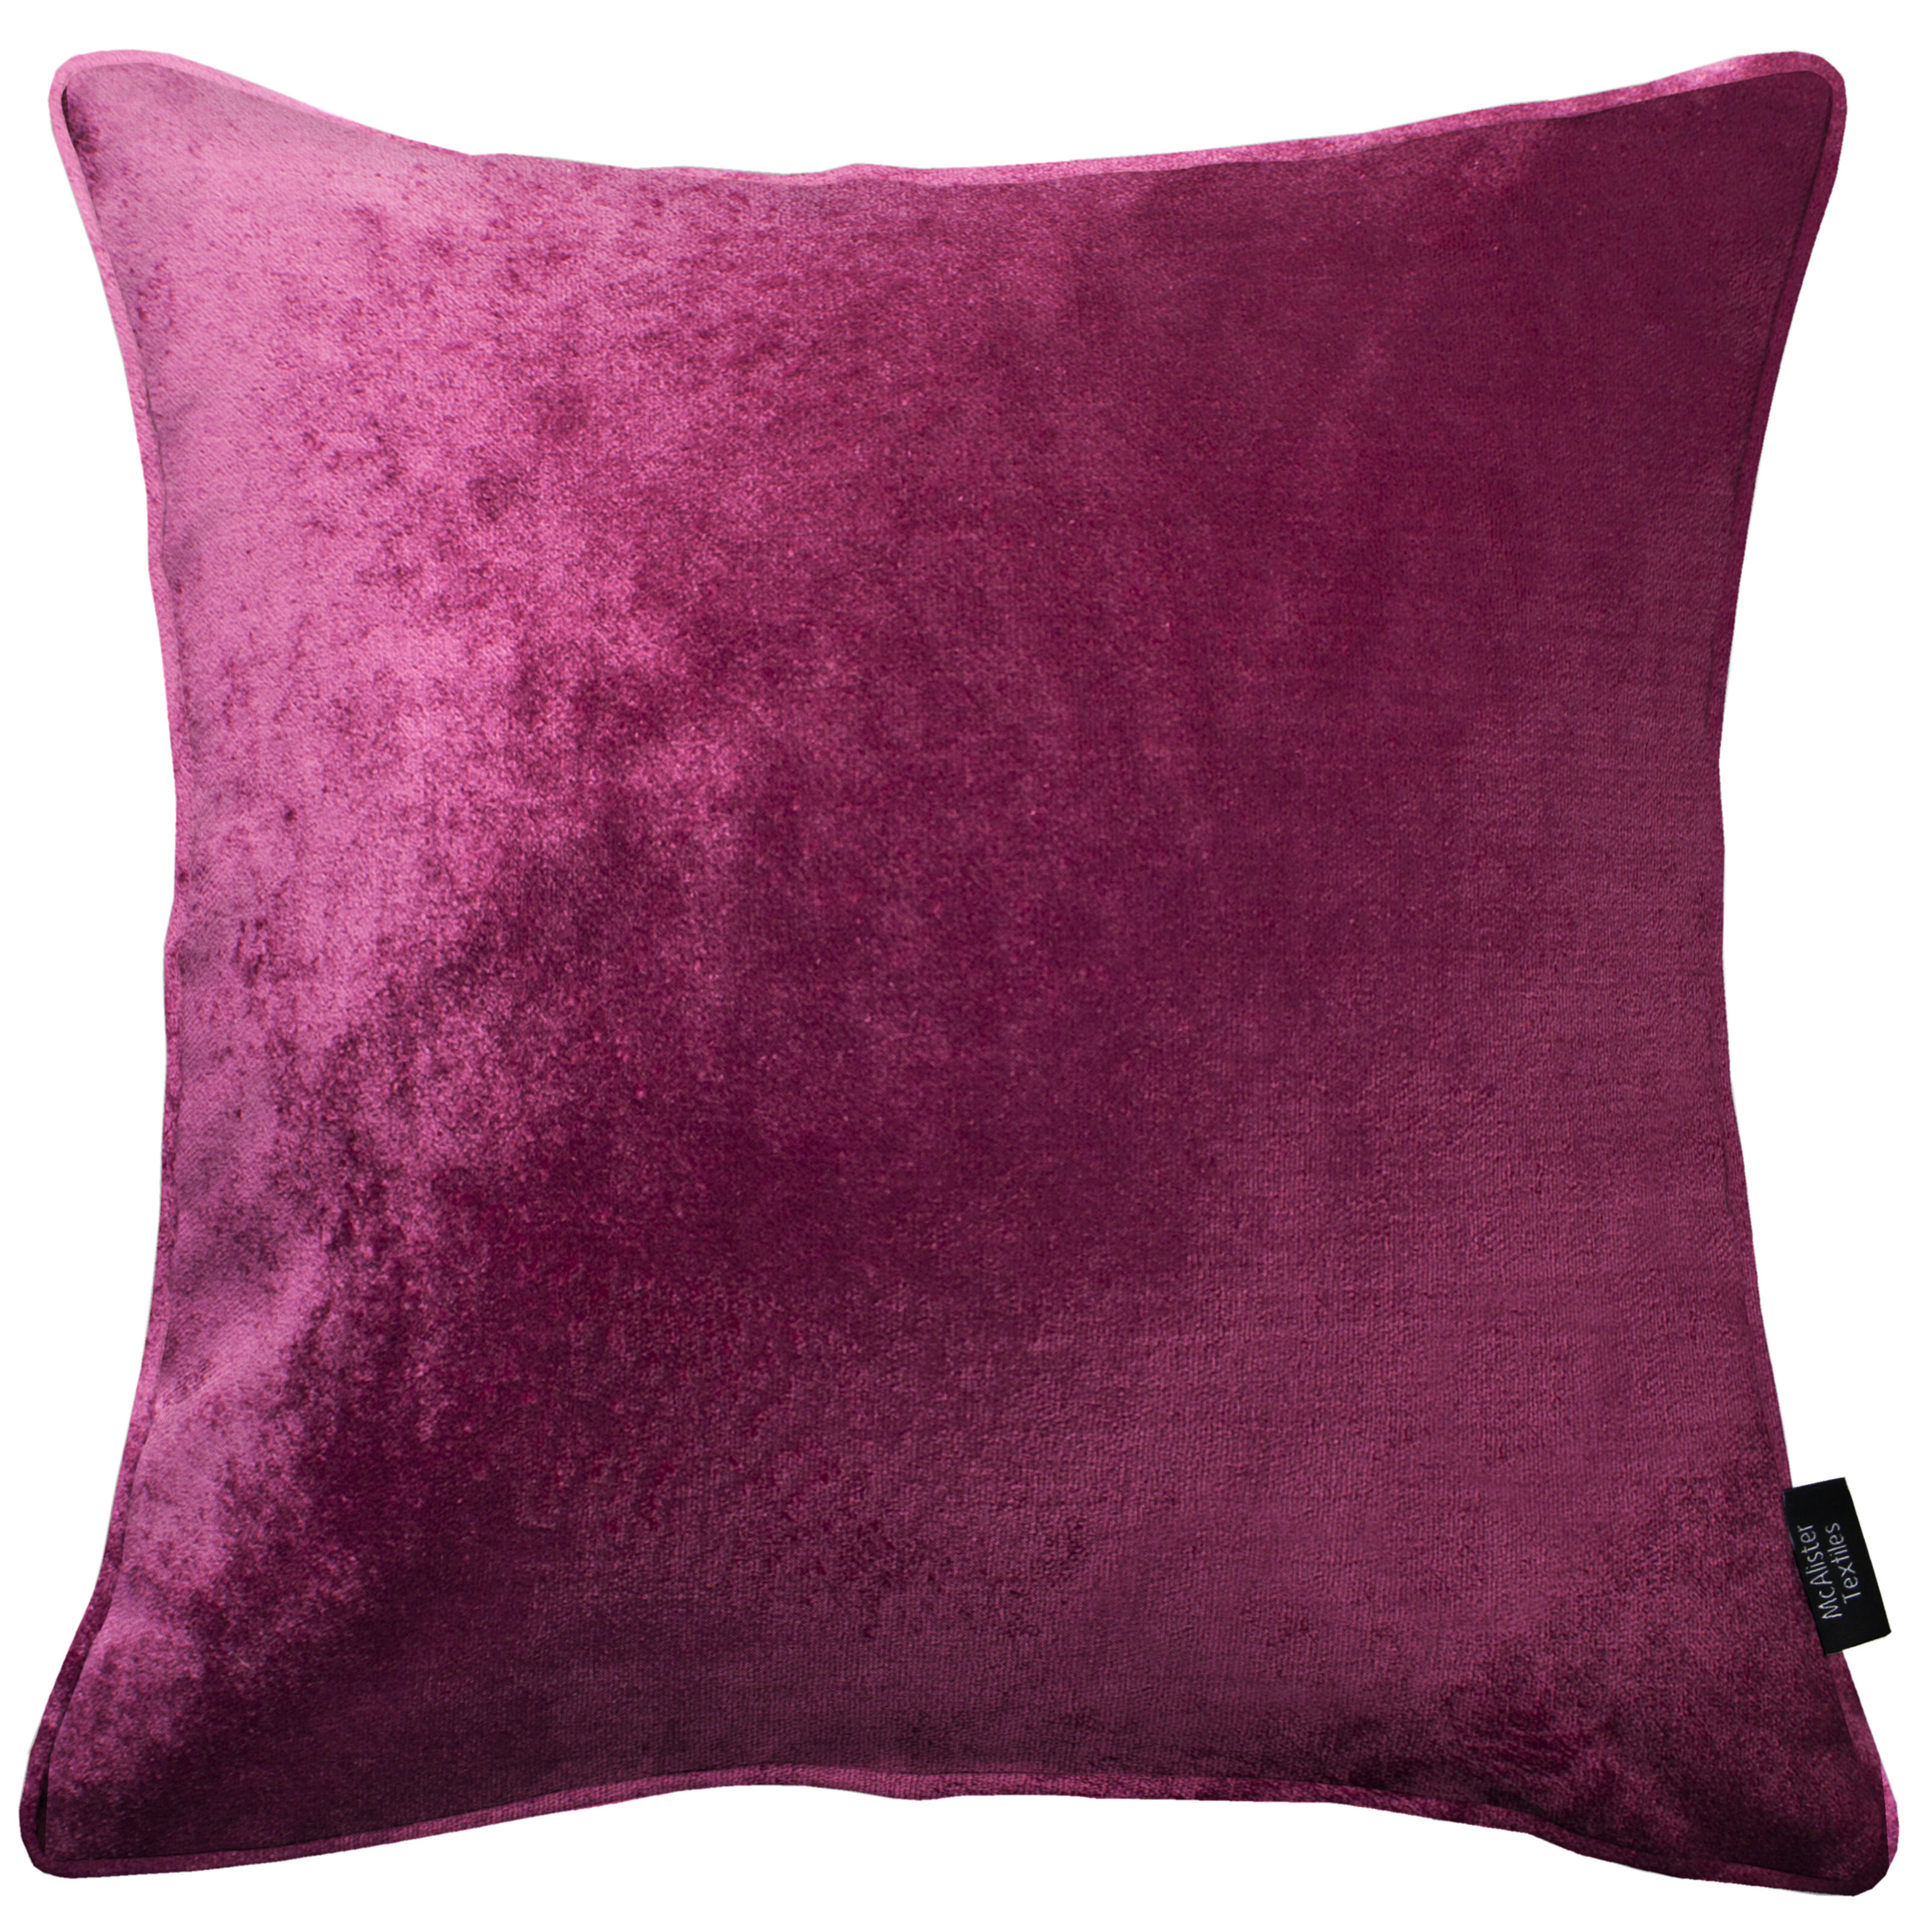 Shiny Smooth Plain Thick Crushed Velvet Deco Throw Pillow Case Cushion Cover 